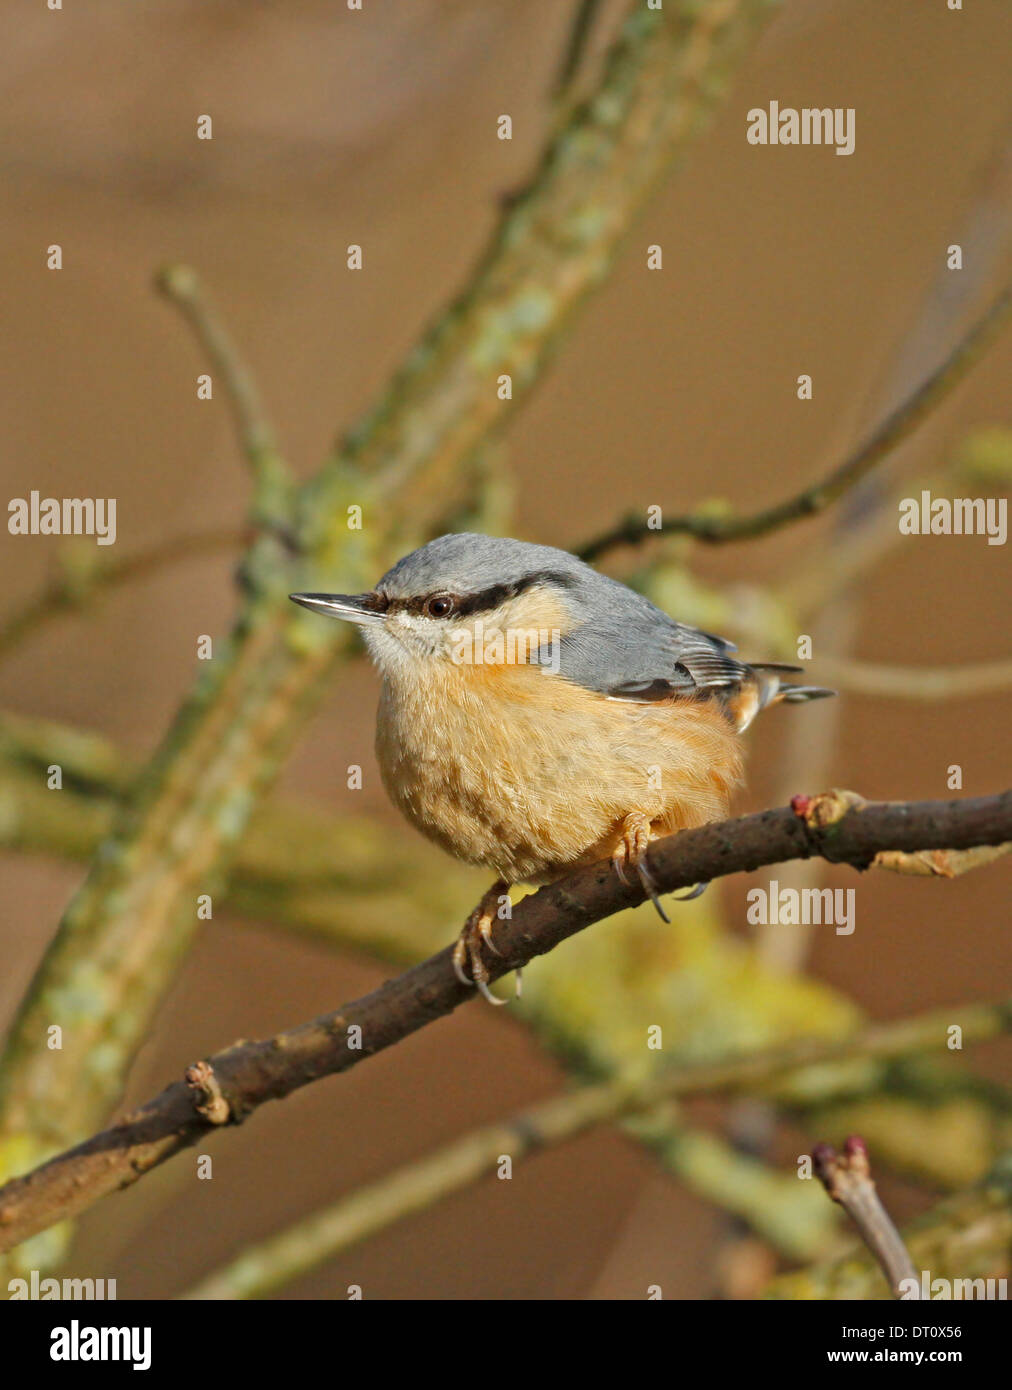 Nuthatch, Sitta europea, perched in tree, Stock Photo